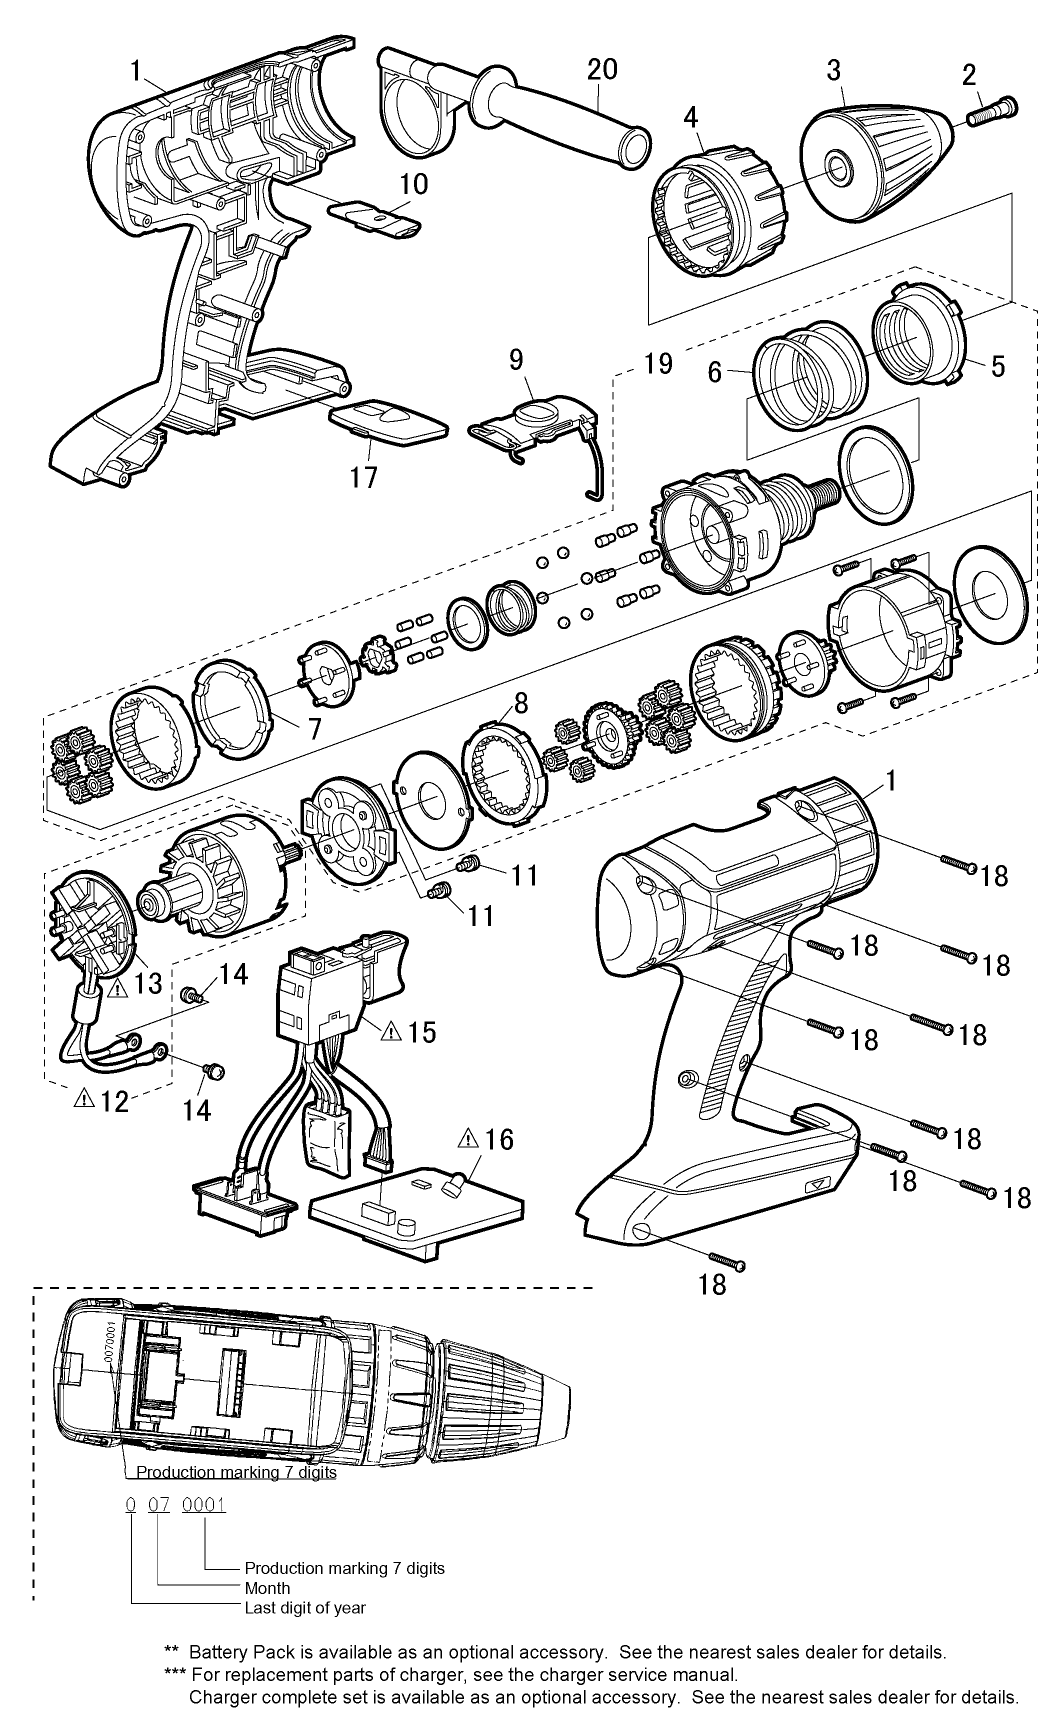 EY7442: Exploded View